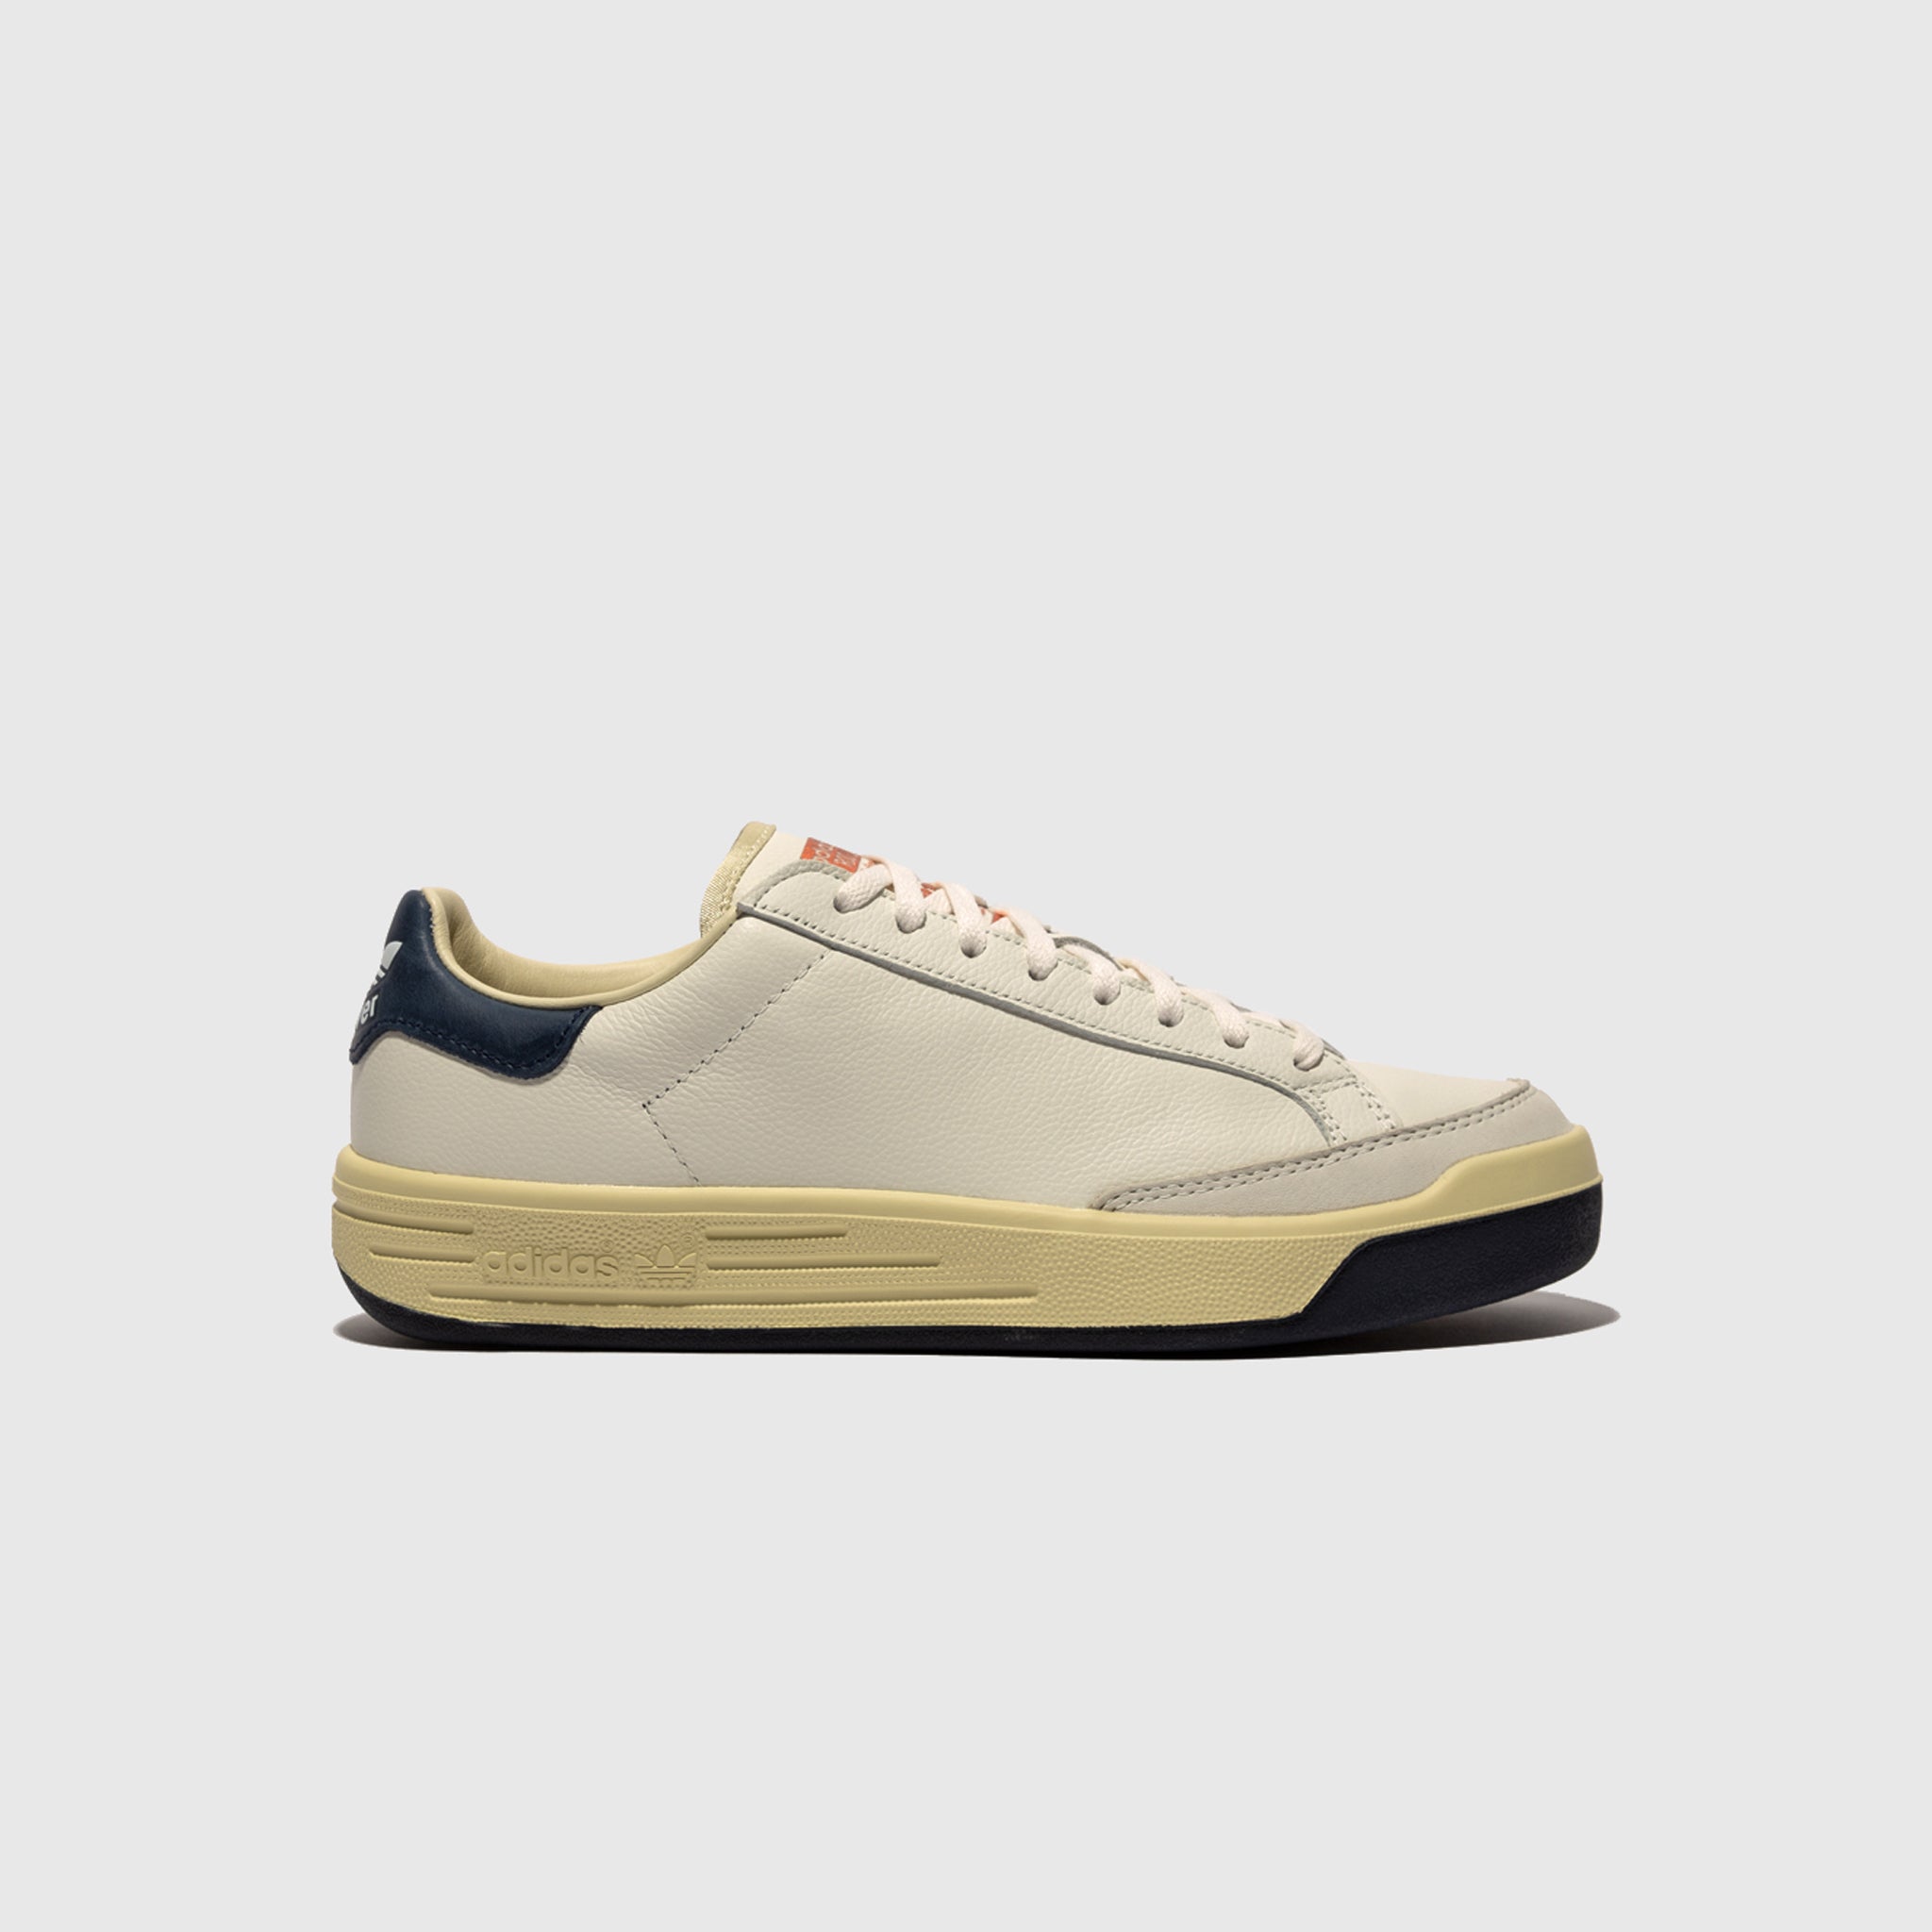 ROD LAVER "LEATHER PACK"